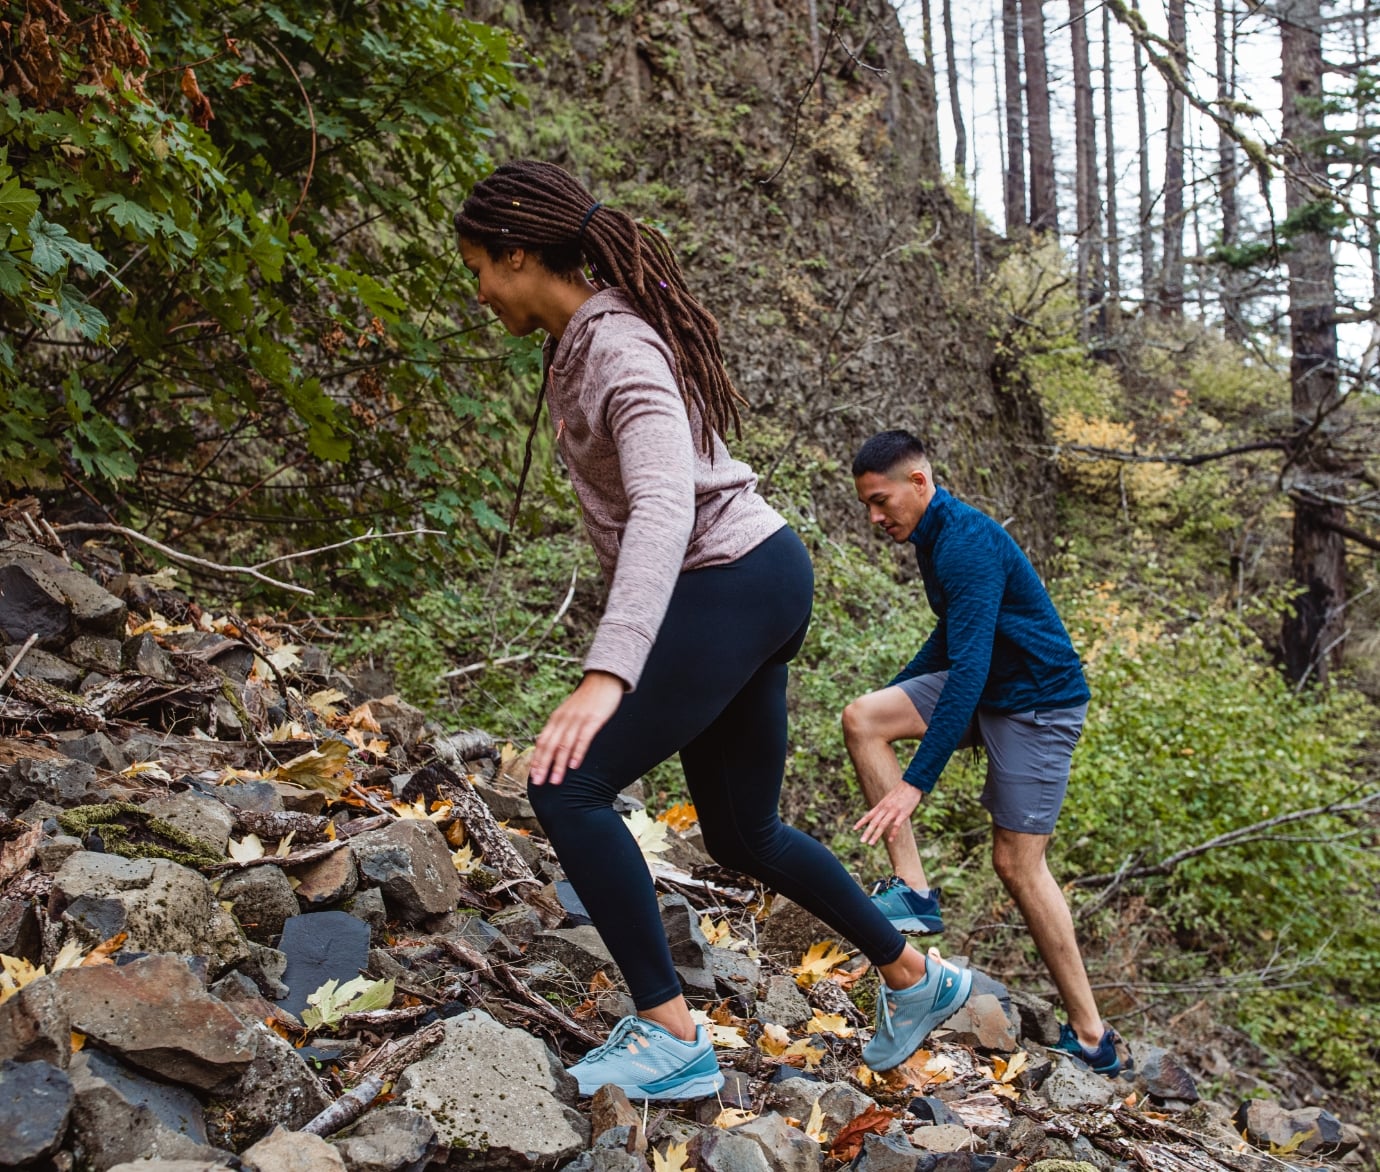 Click to shop the men's and women's Cascade Trail. Image features a man and women hiking in their Cascade Trails.